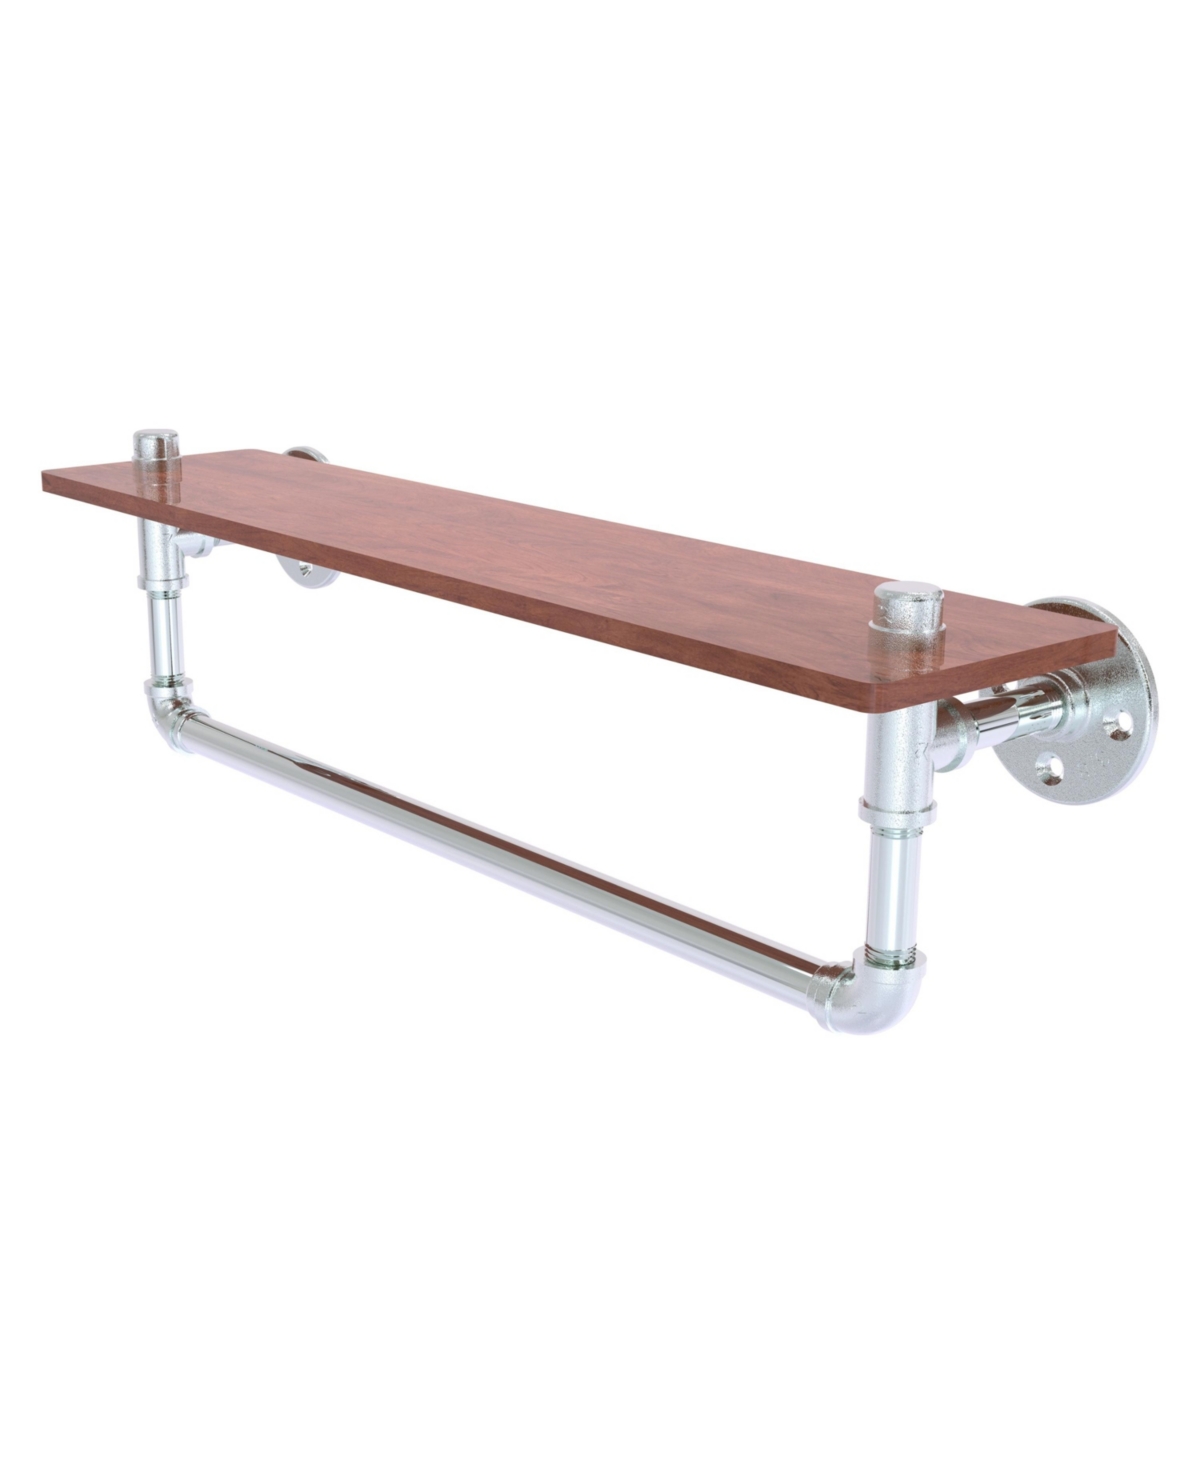 Allied Brass Pipeline Collection 22 Inch Ironwood Shelf With Towel Bar In Polished Chrome